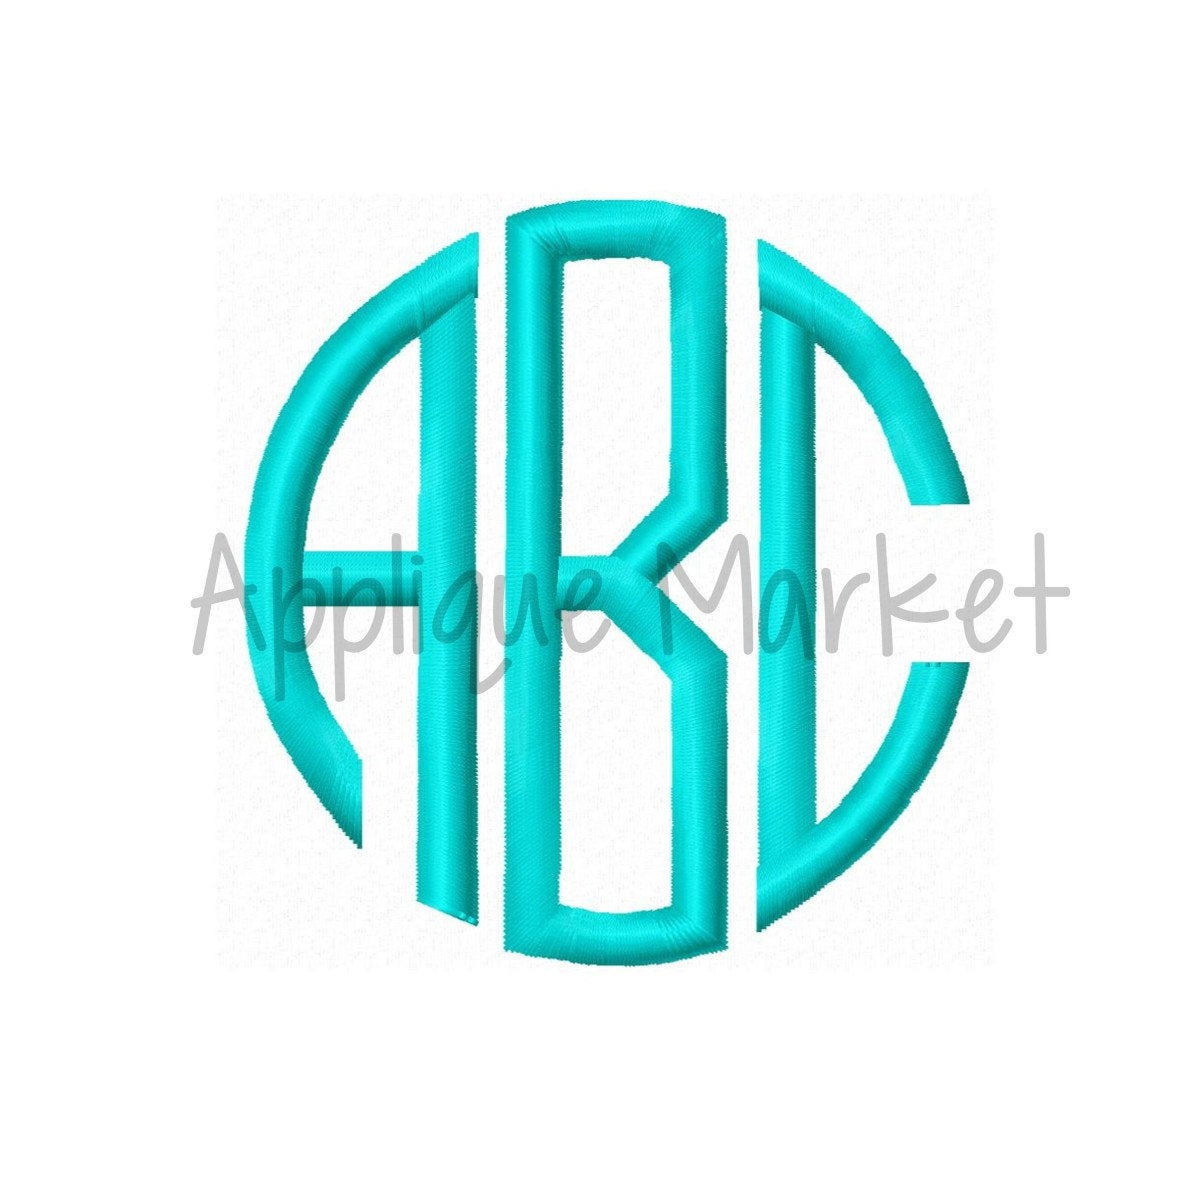 Monogram Patterns For Embroidery Machine Embroidery Design Embroidery Round Monogram Satin Font Instant Download